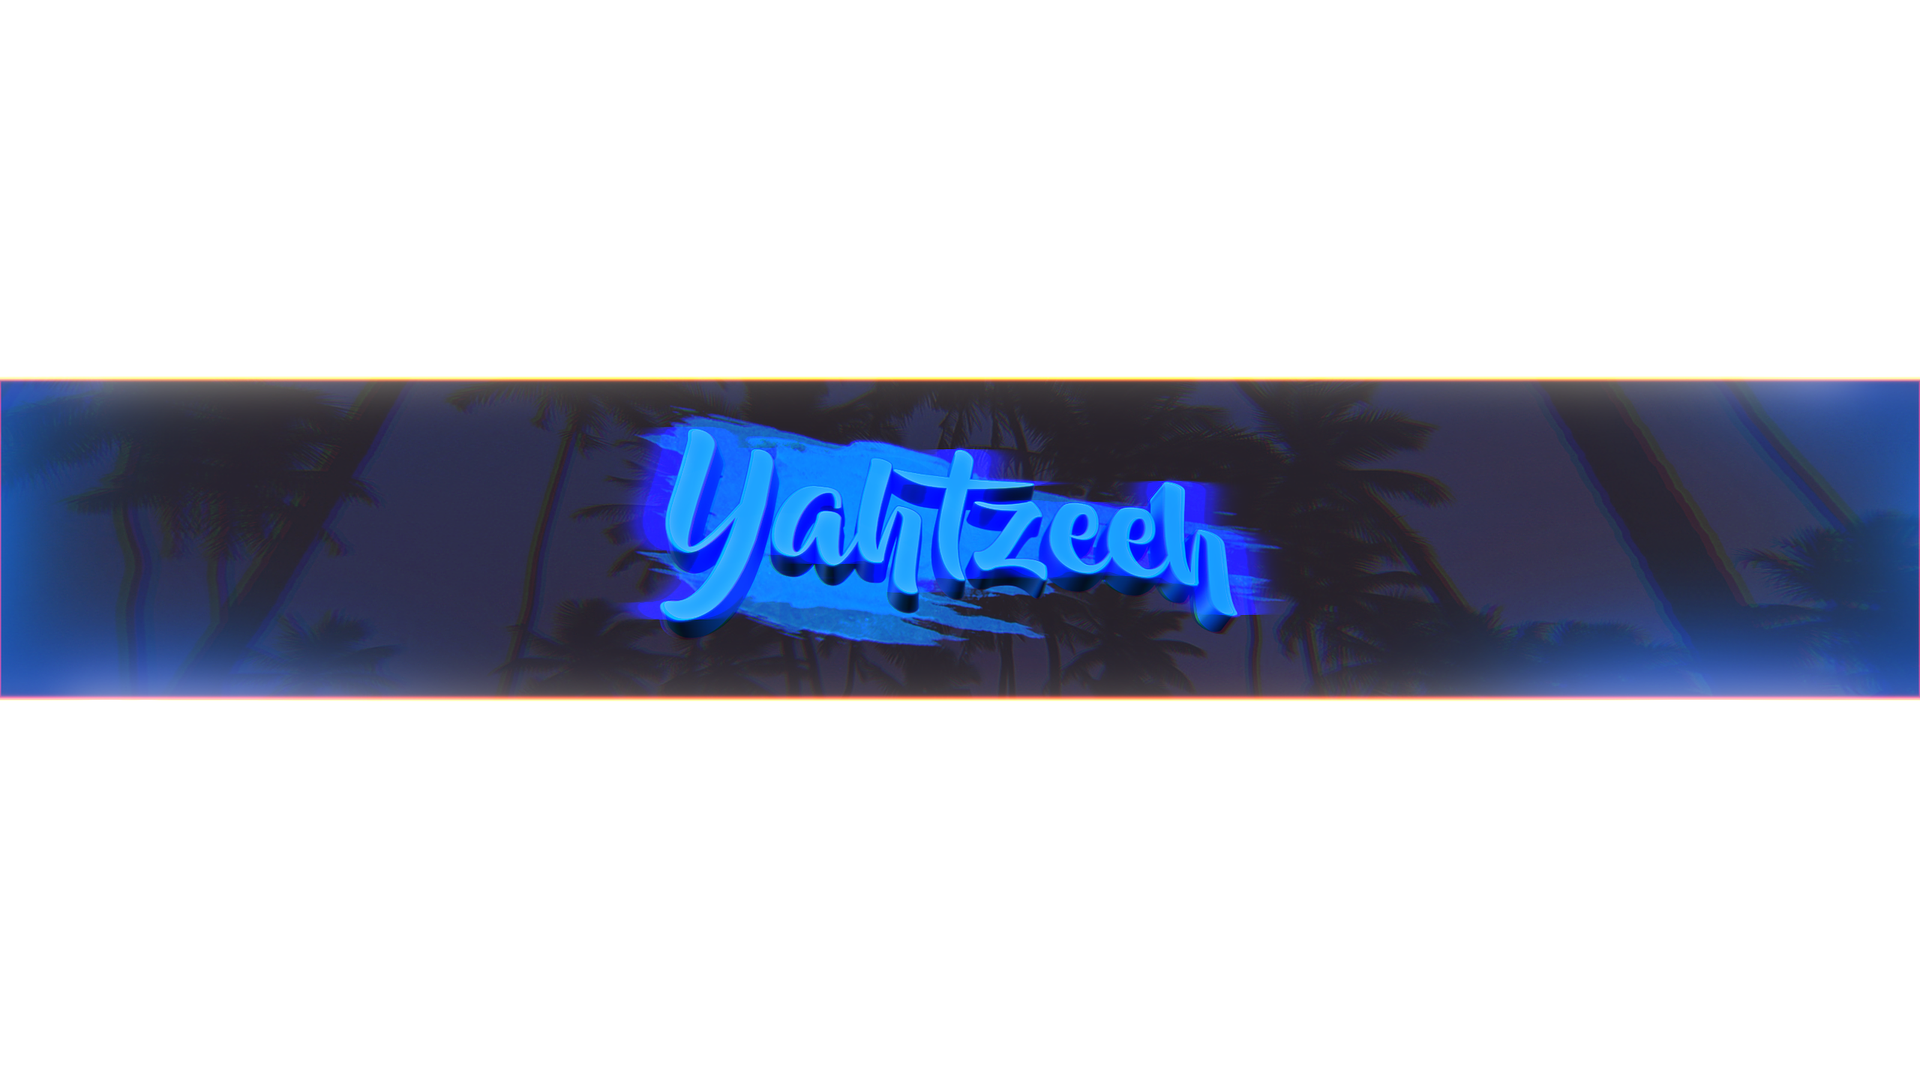 youtube-banner-template-2015_18800%20copy_zpsyms0vh1l.png